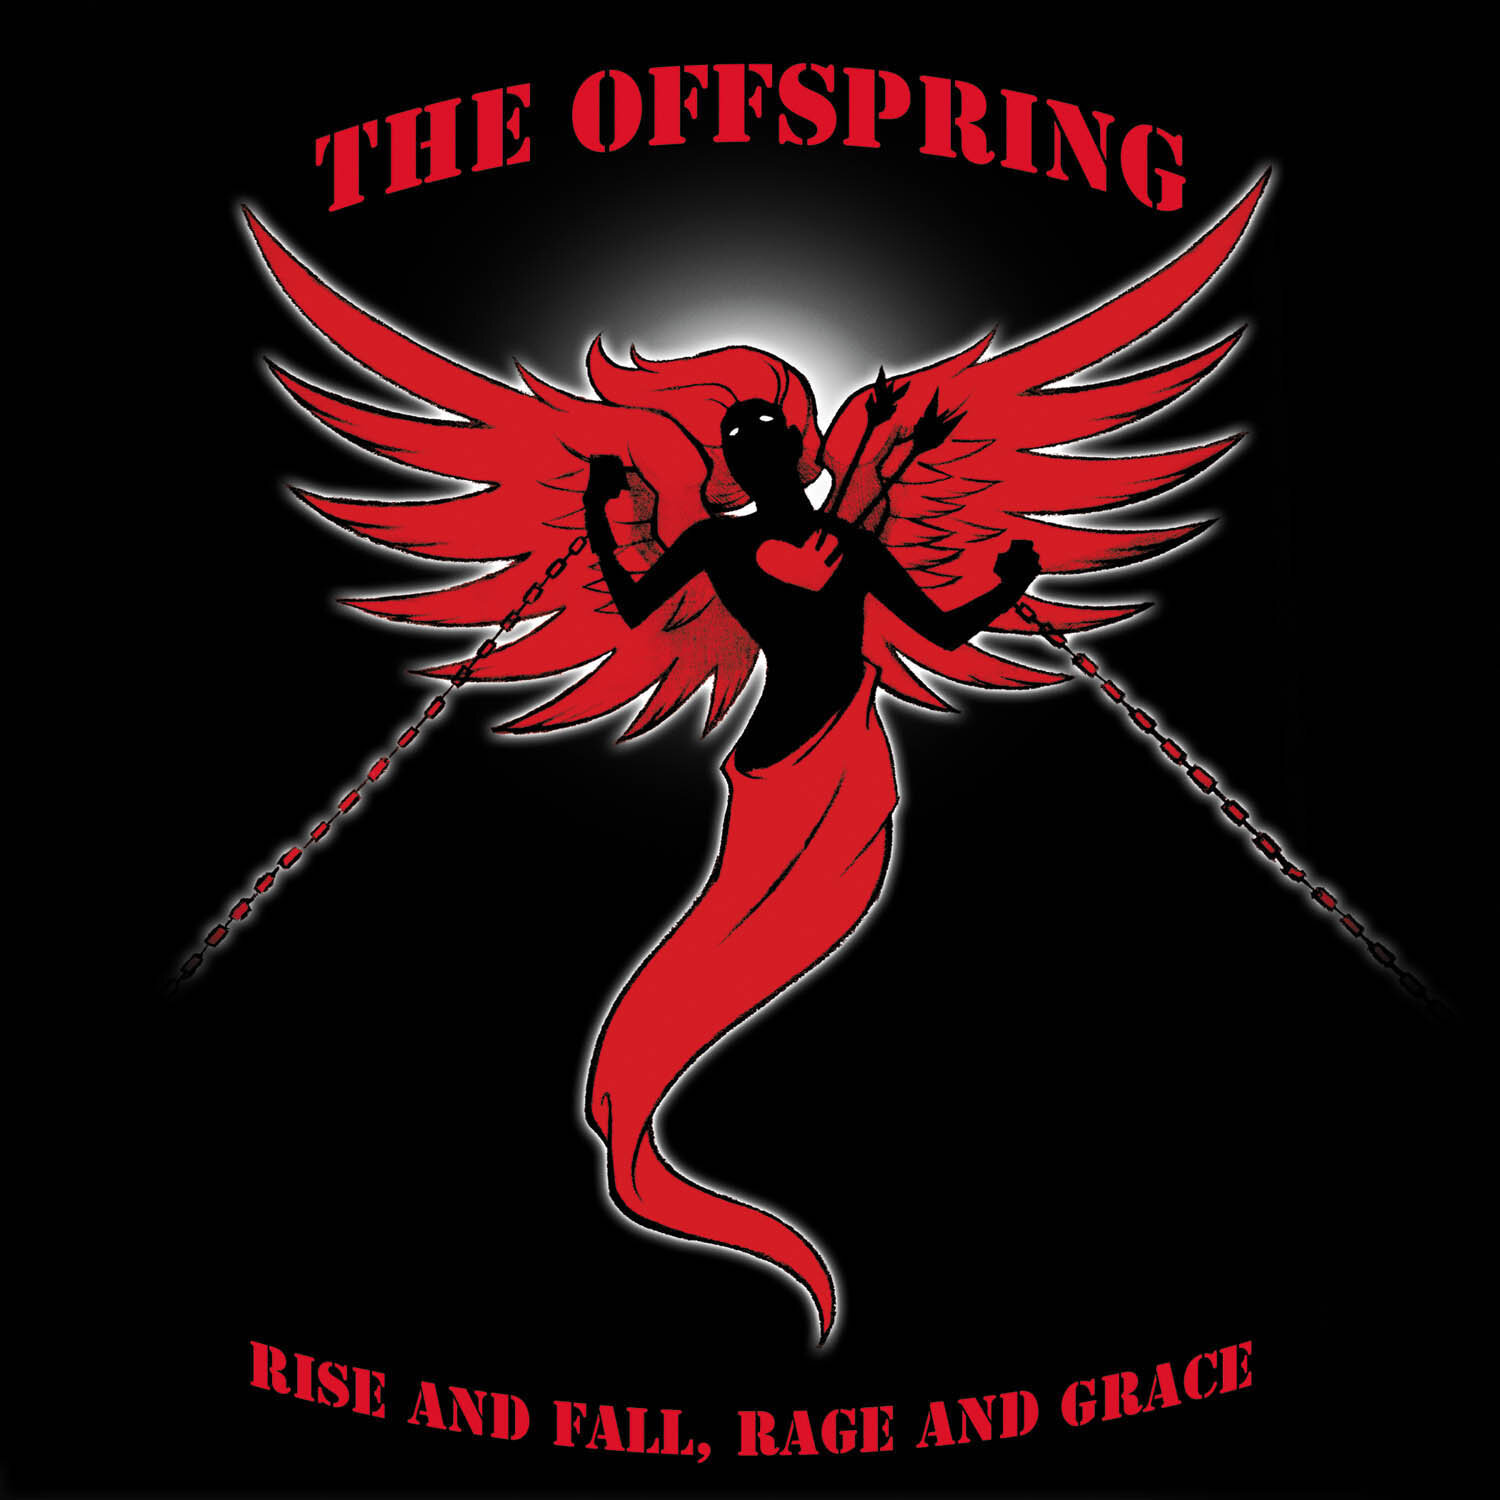 The Offspring | Rise and Fall, Rage & Grace Album Package Design